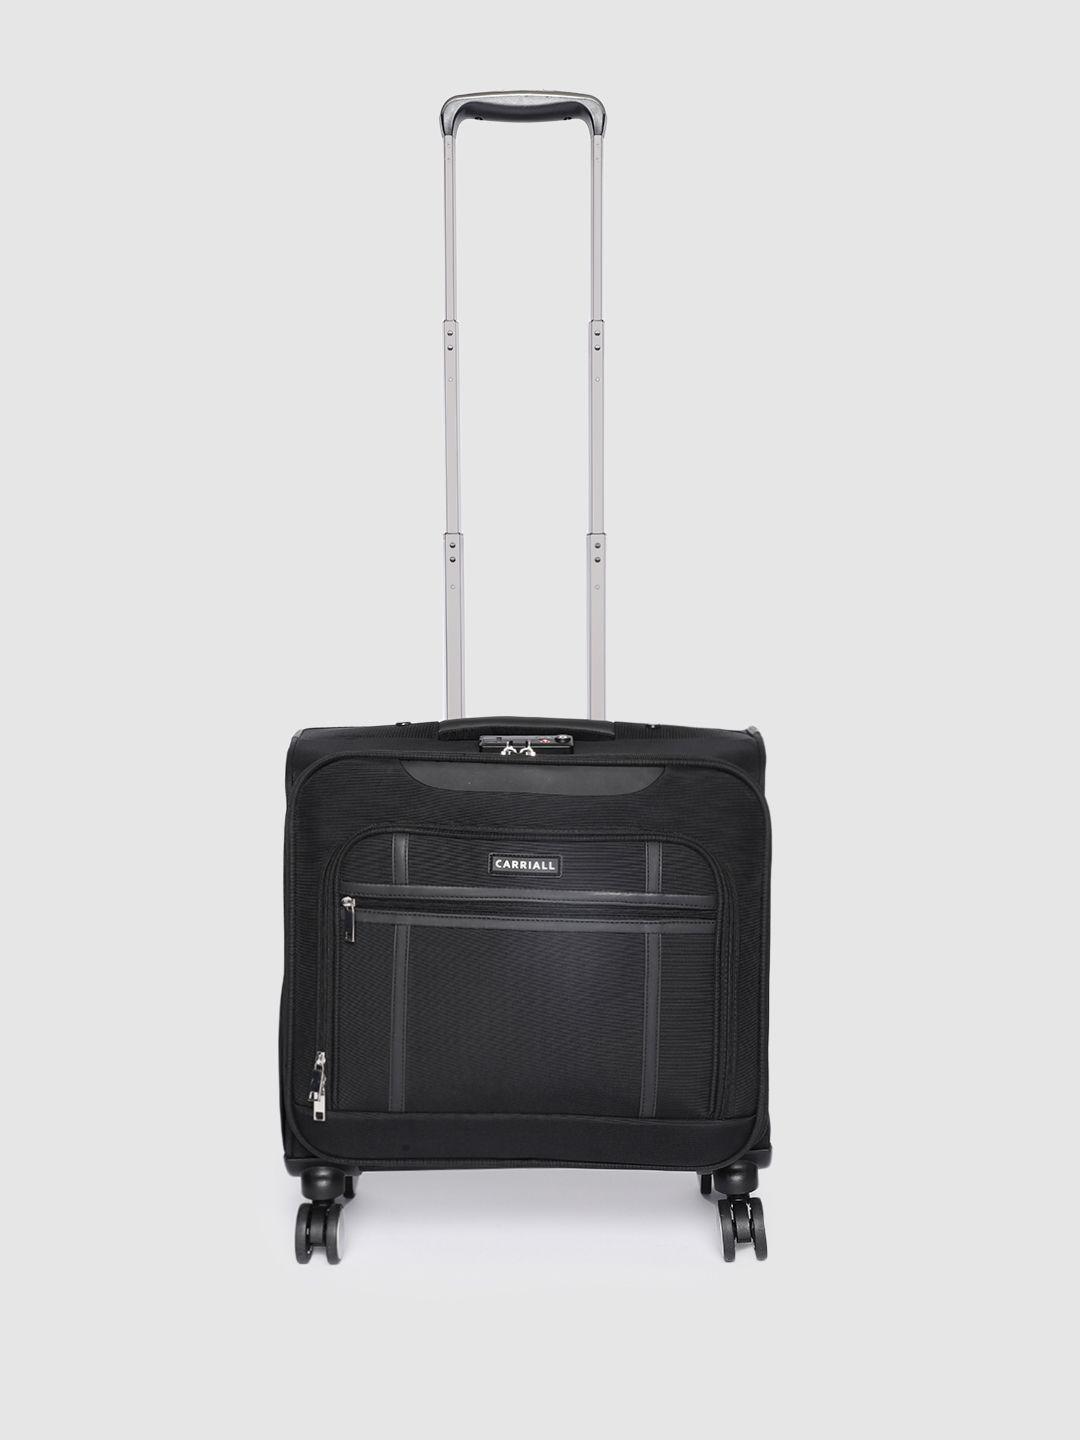 carriall black solid laptop roller case cabin trolley bag